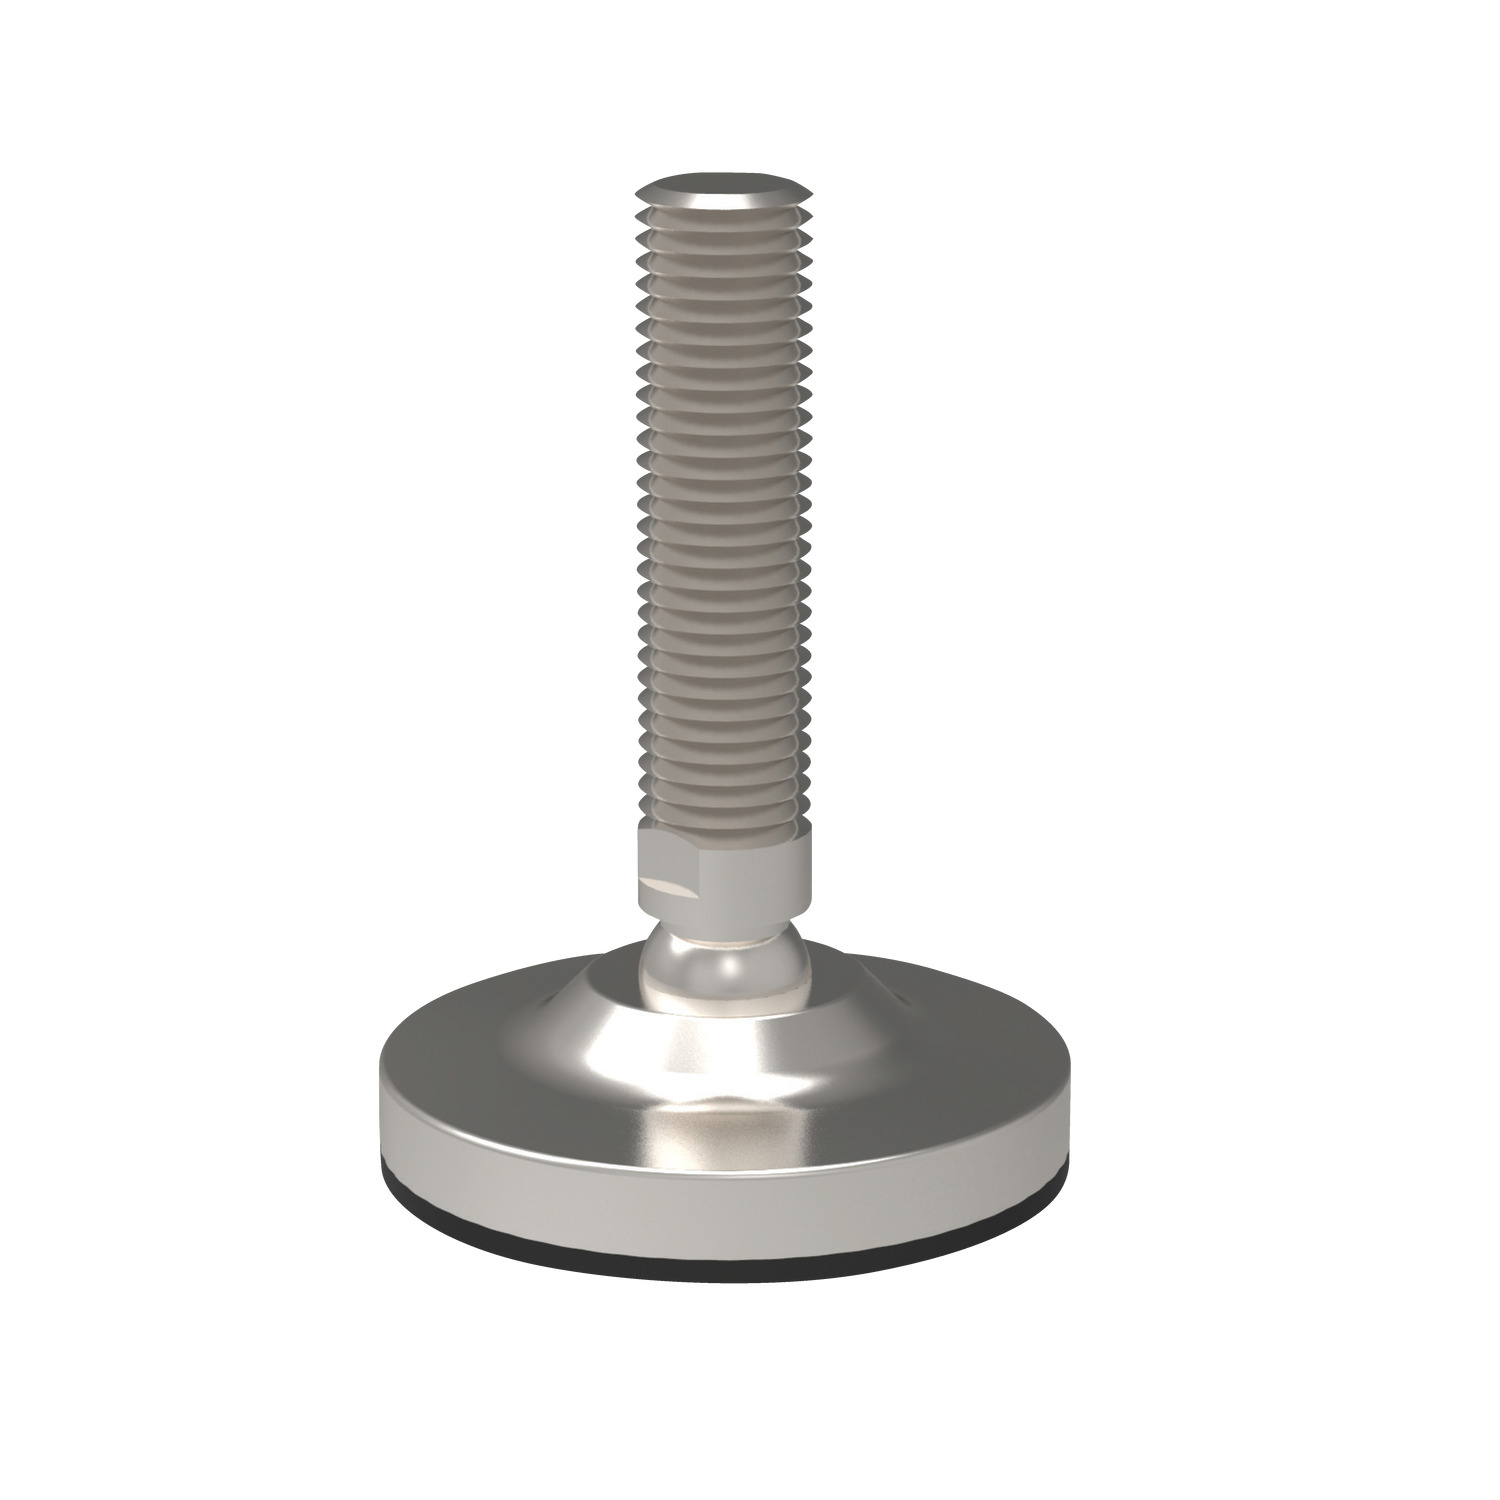 Mini Levelling Feet Stainless steel levelling feet with grippy rubber pads are ideal for laboratories and/or medical settings, among other things. Shown here in 303 series stainless steel; 316 series stainless steel available on request. See our range of anti-vibration levelling feet here.